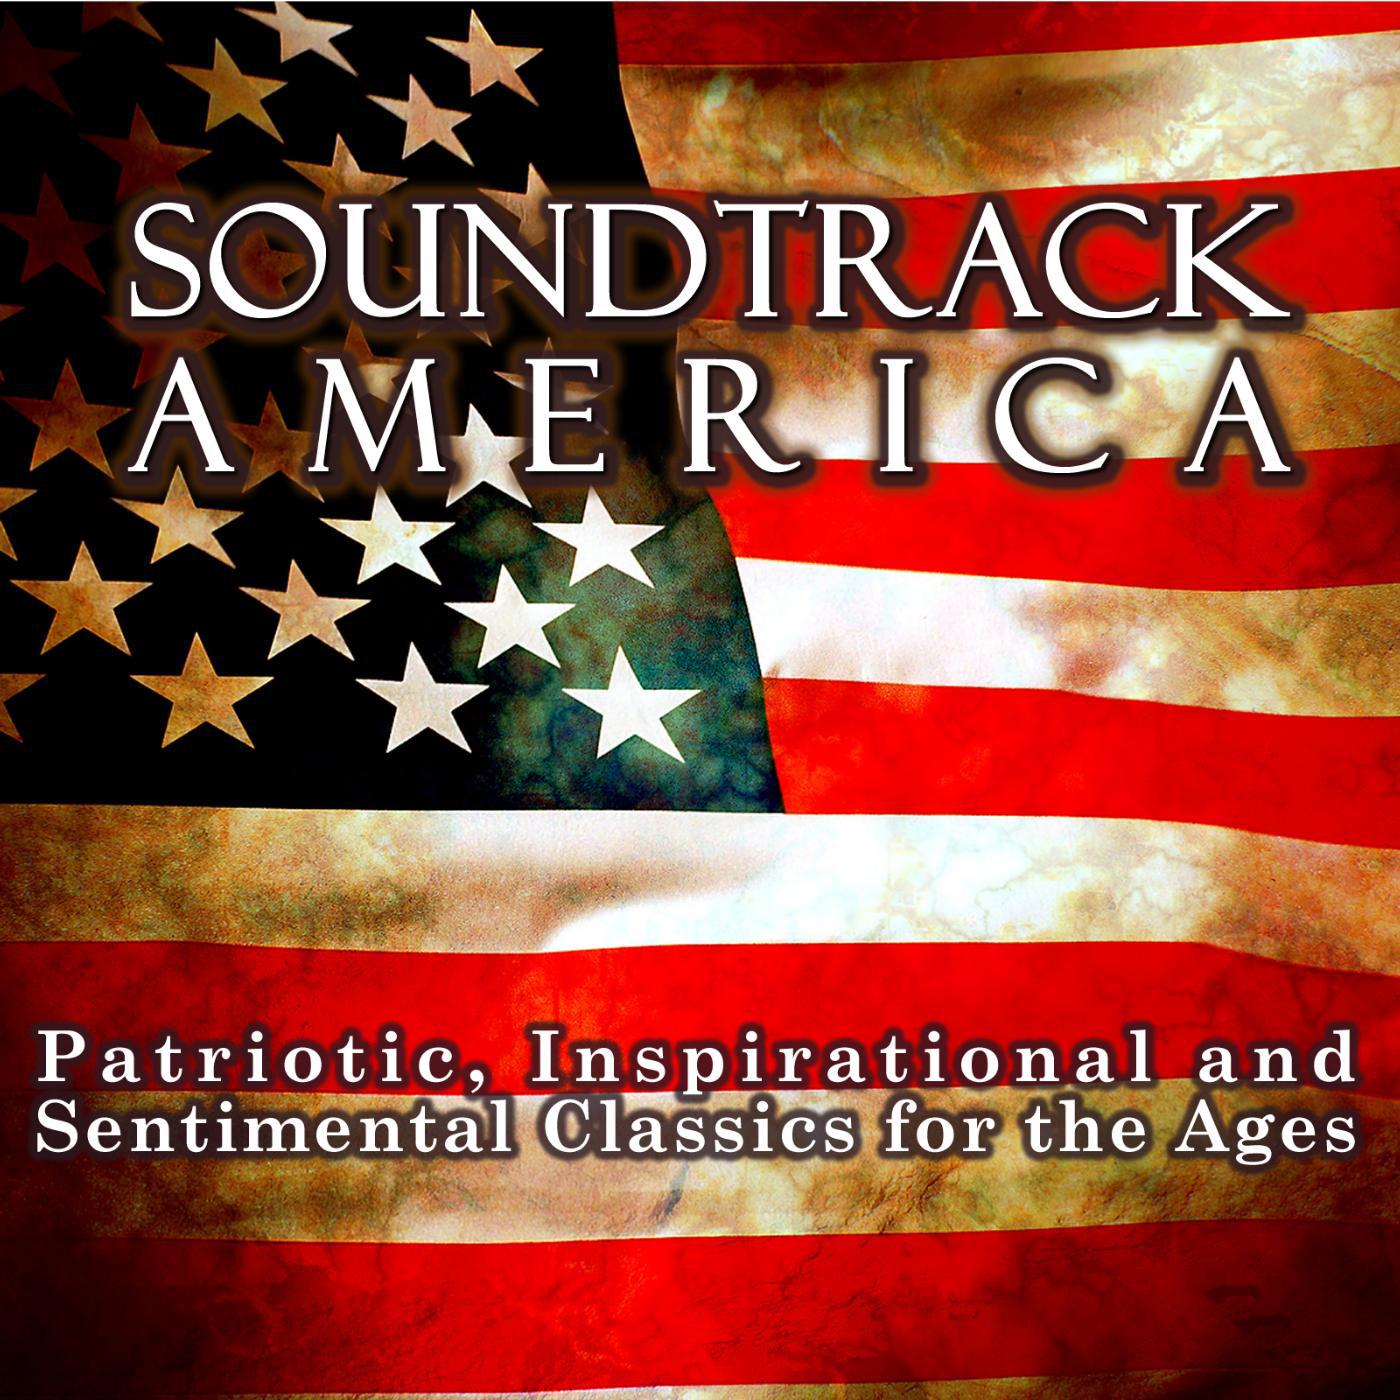 Постер альбома Soundtrack America. Patriotic, Inspirational and Sentimental Classics for the Ages.